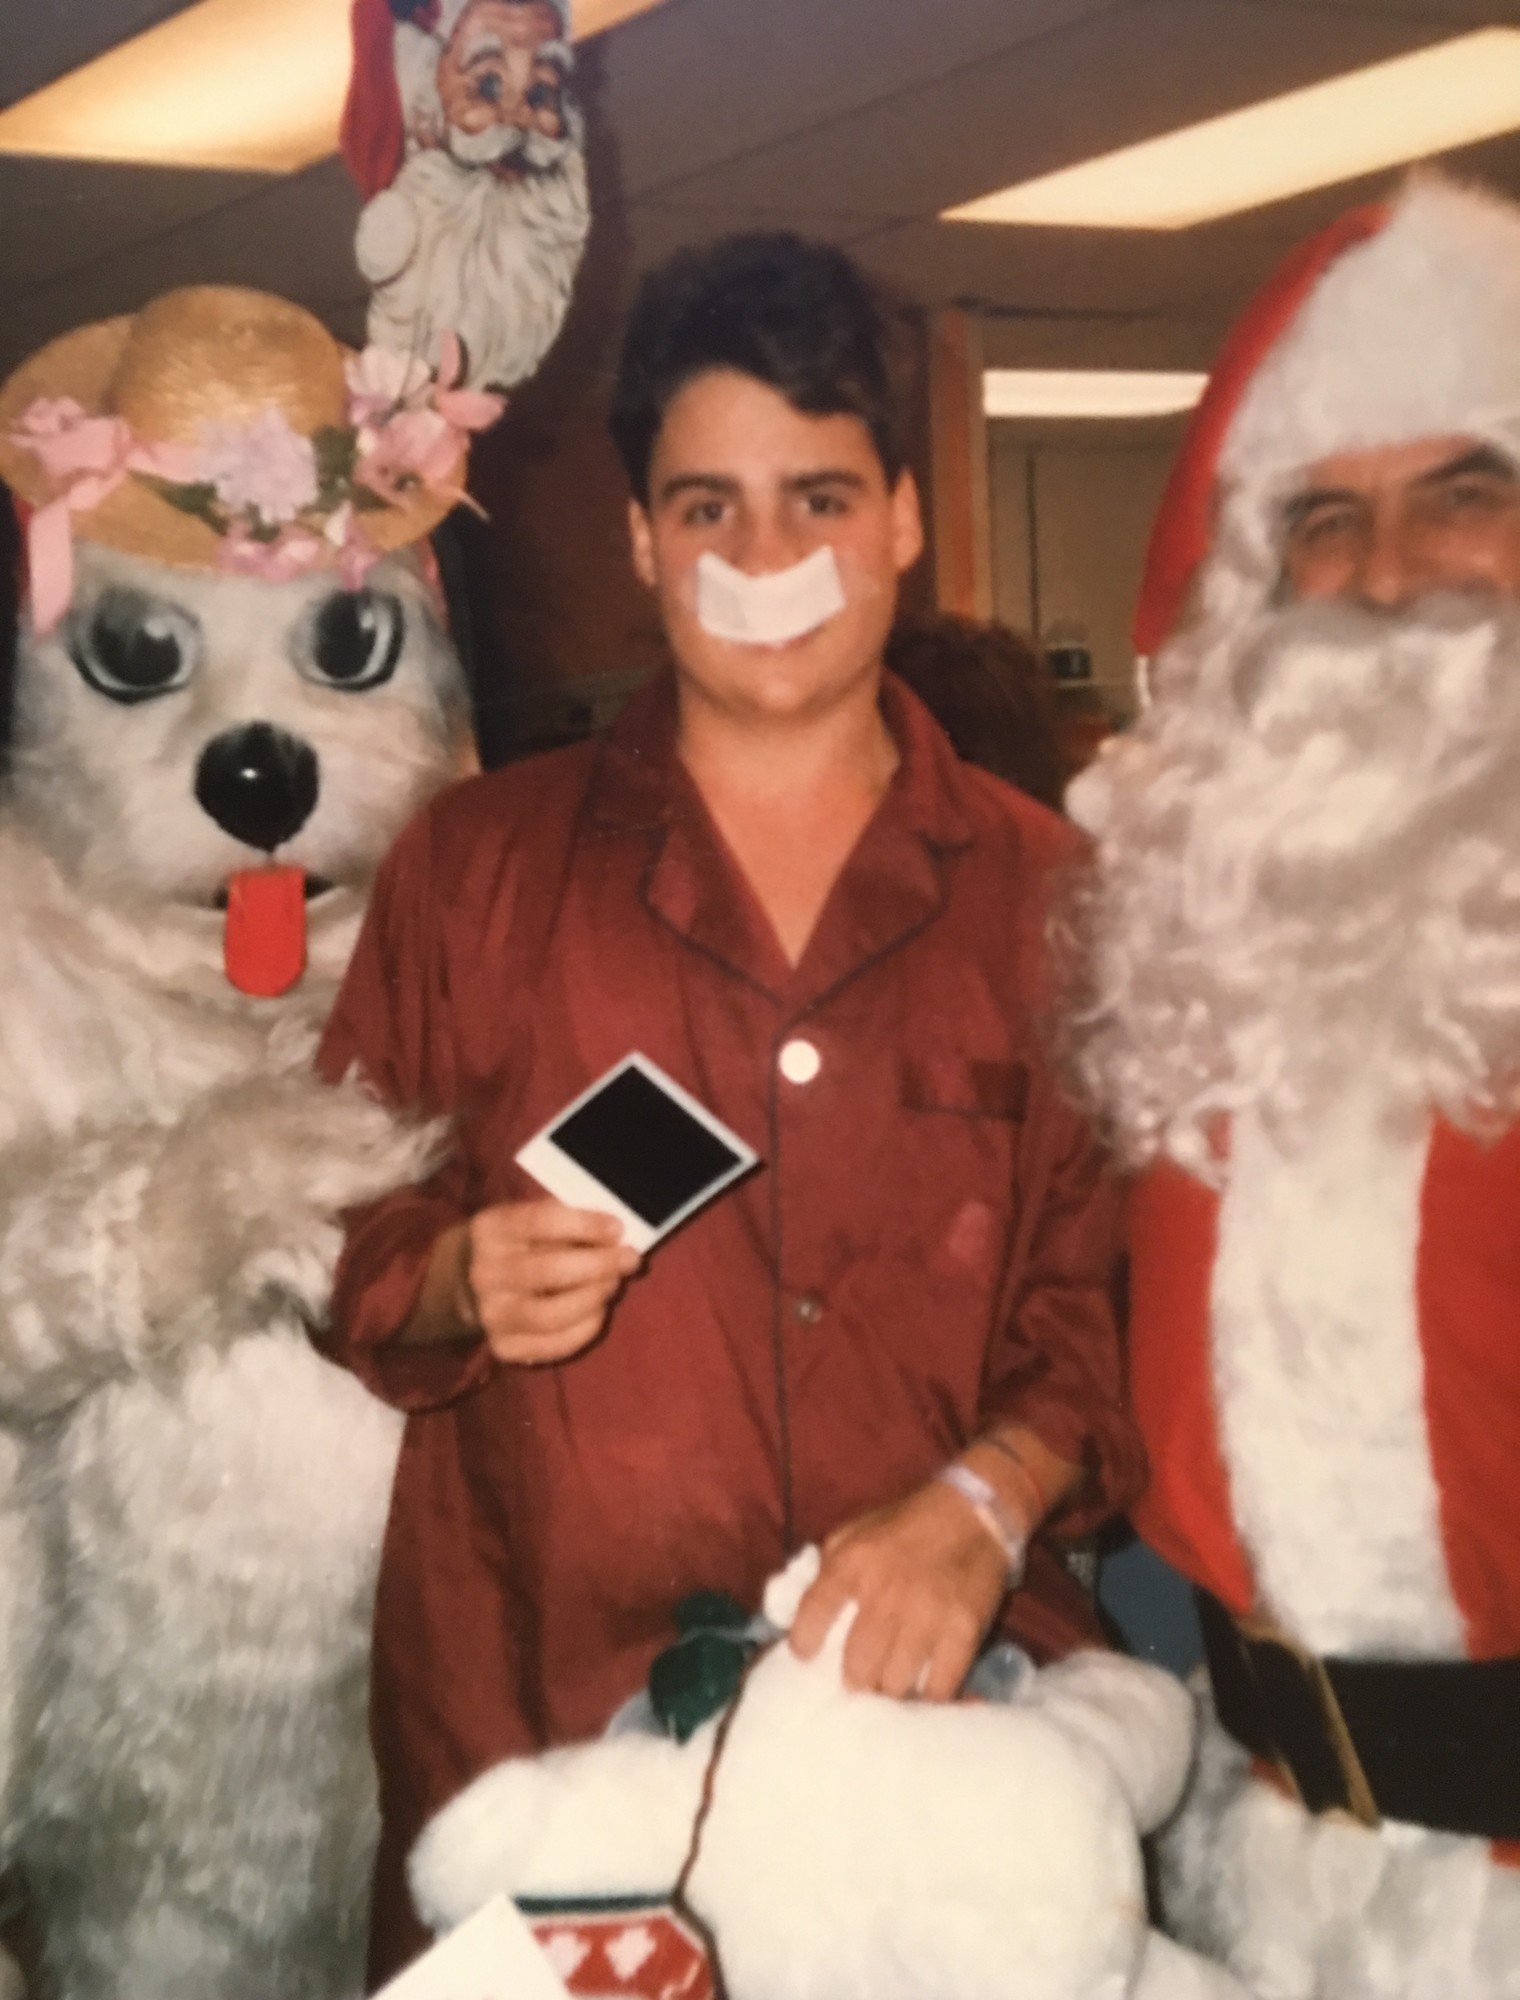 John Theissen held the teddy bear that Tasha asked Santa to bring him when he was in the hospital 27 years ago.